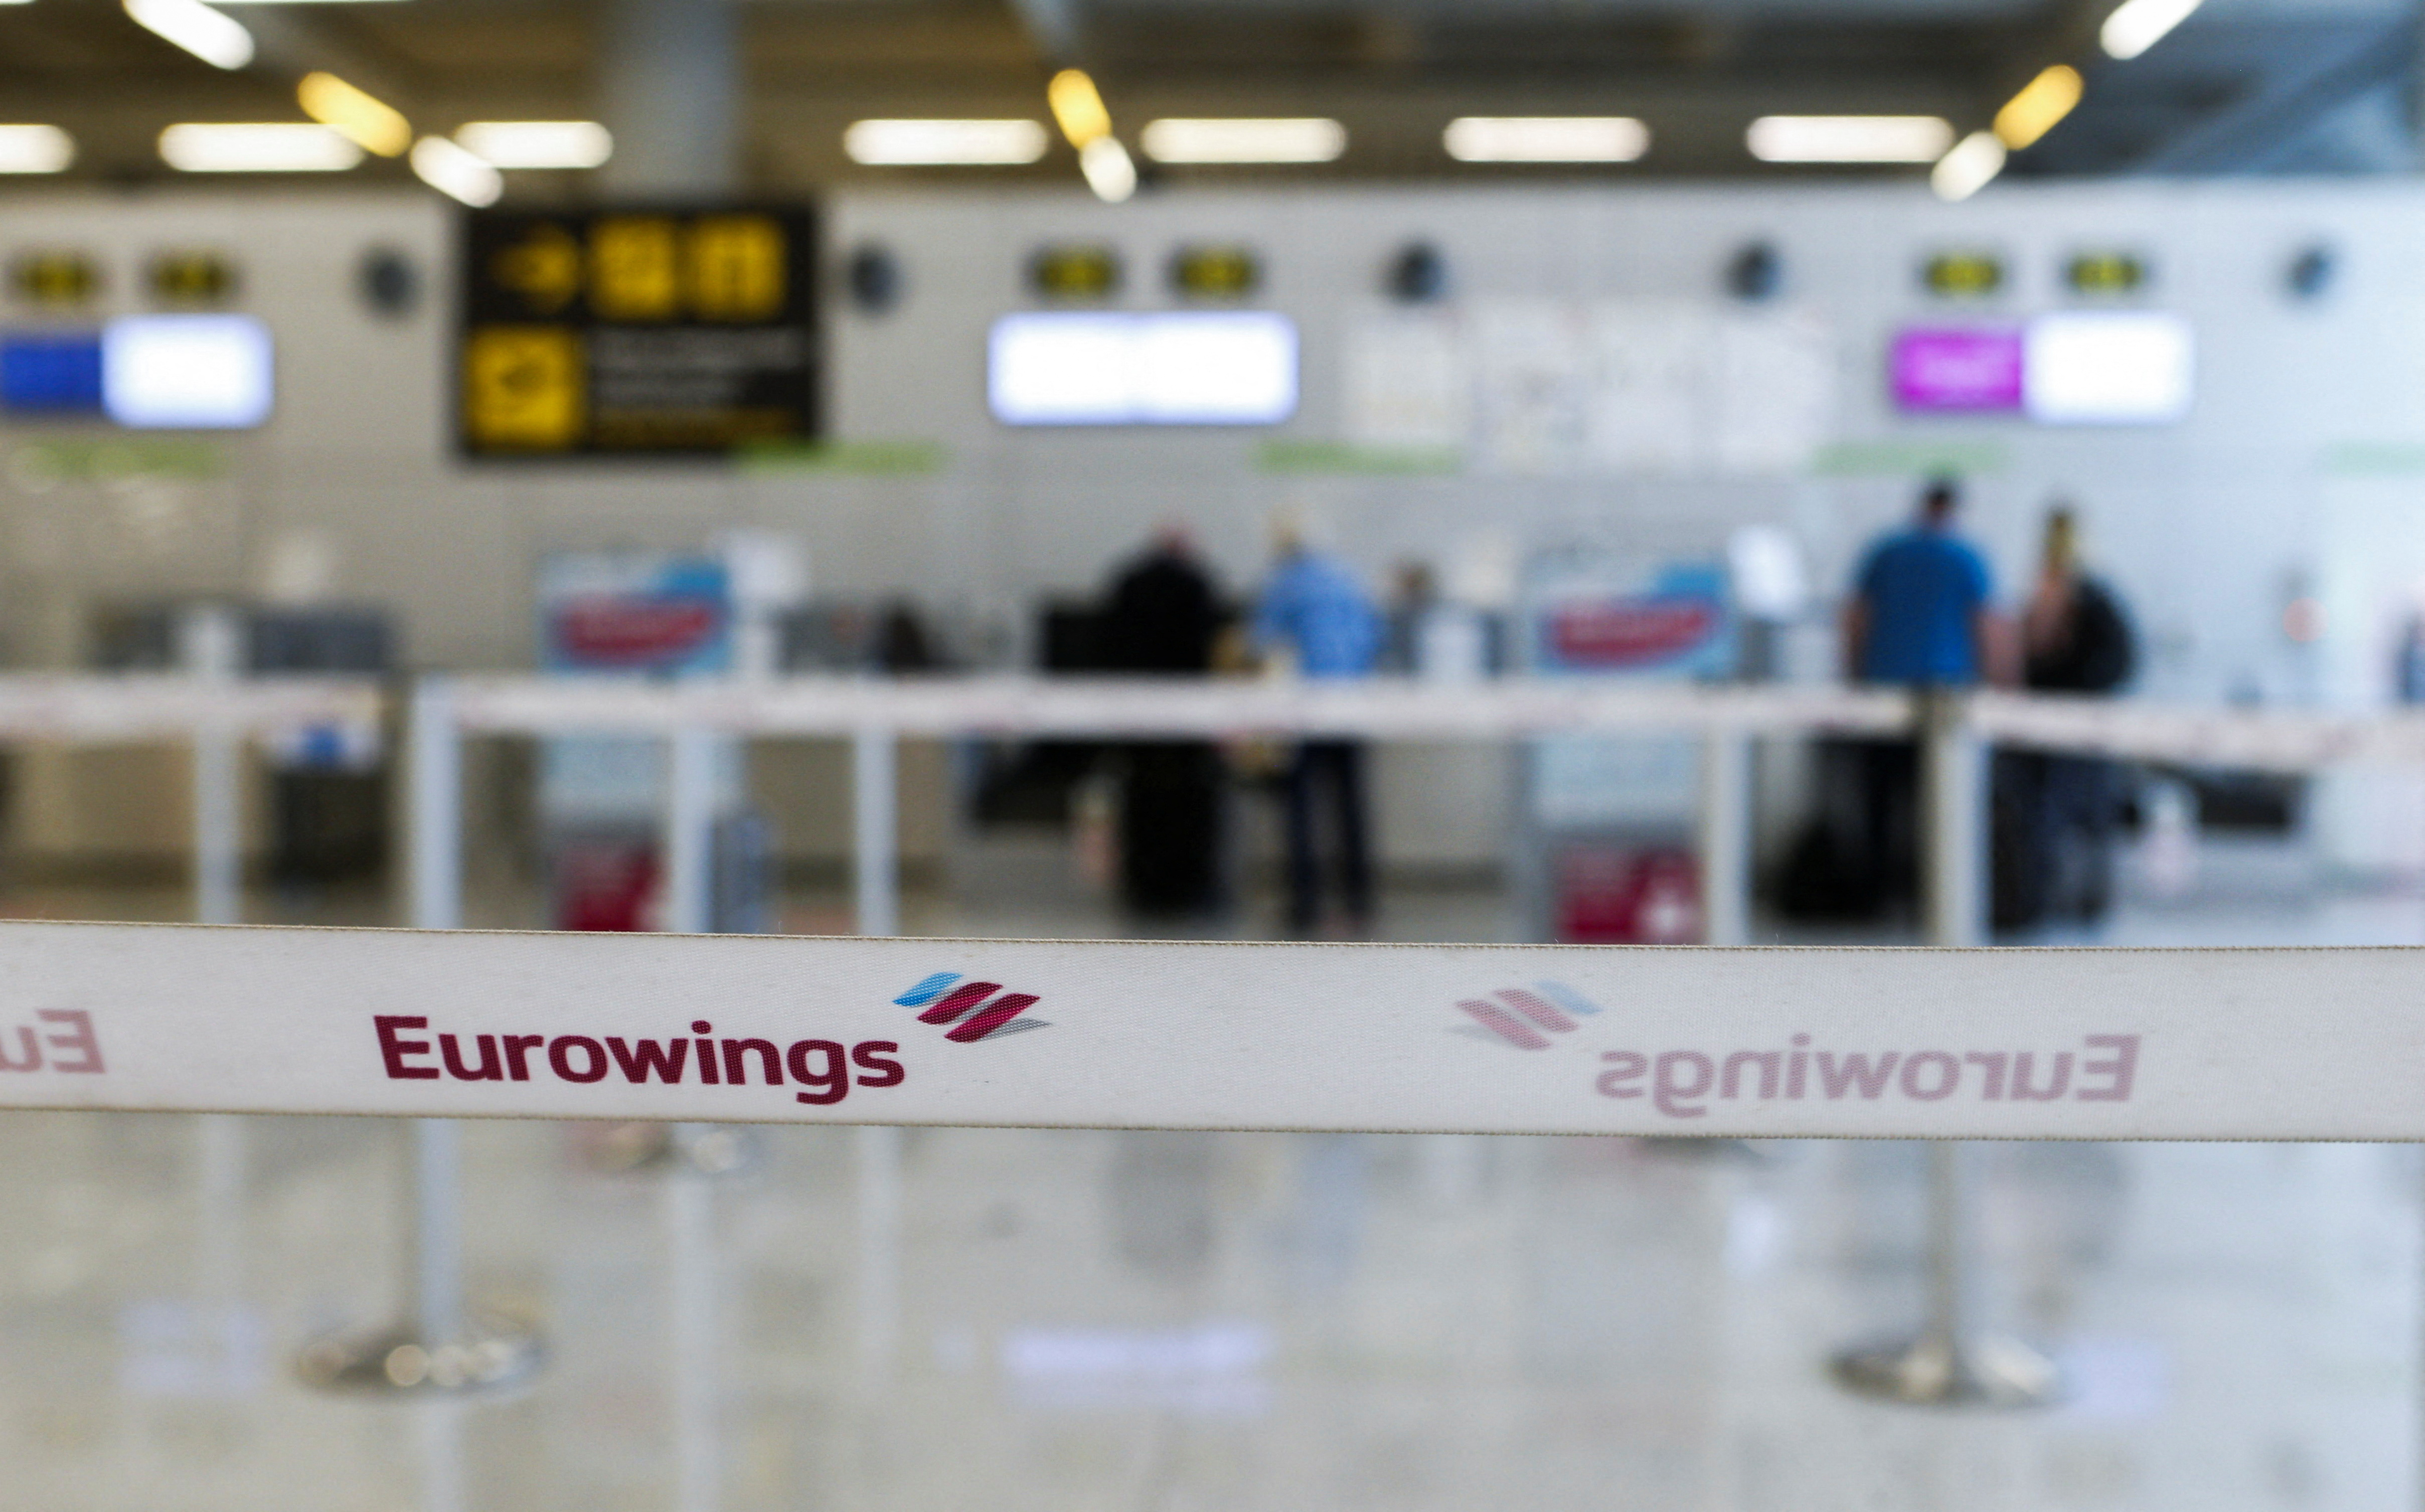 German tourists stand at Eurowings check-in counters at Son Sant Joan airport in Palma de Mallorca